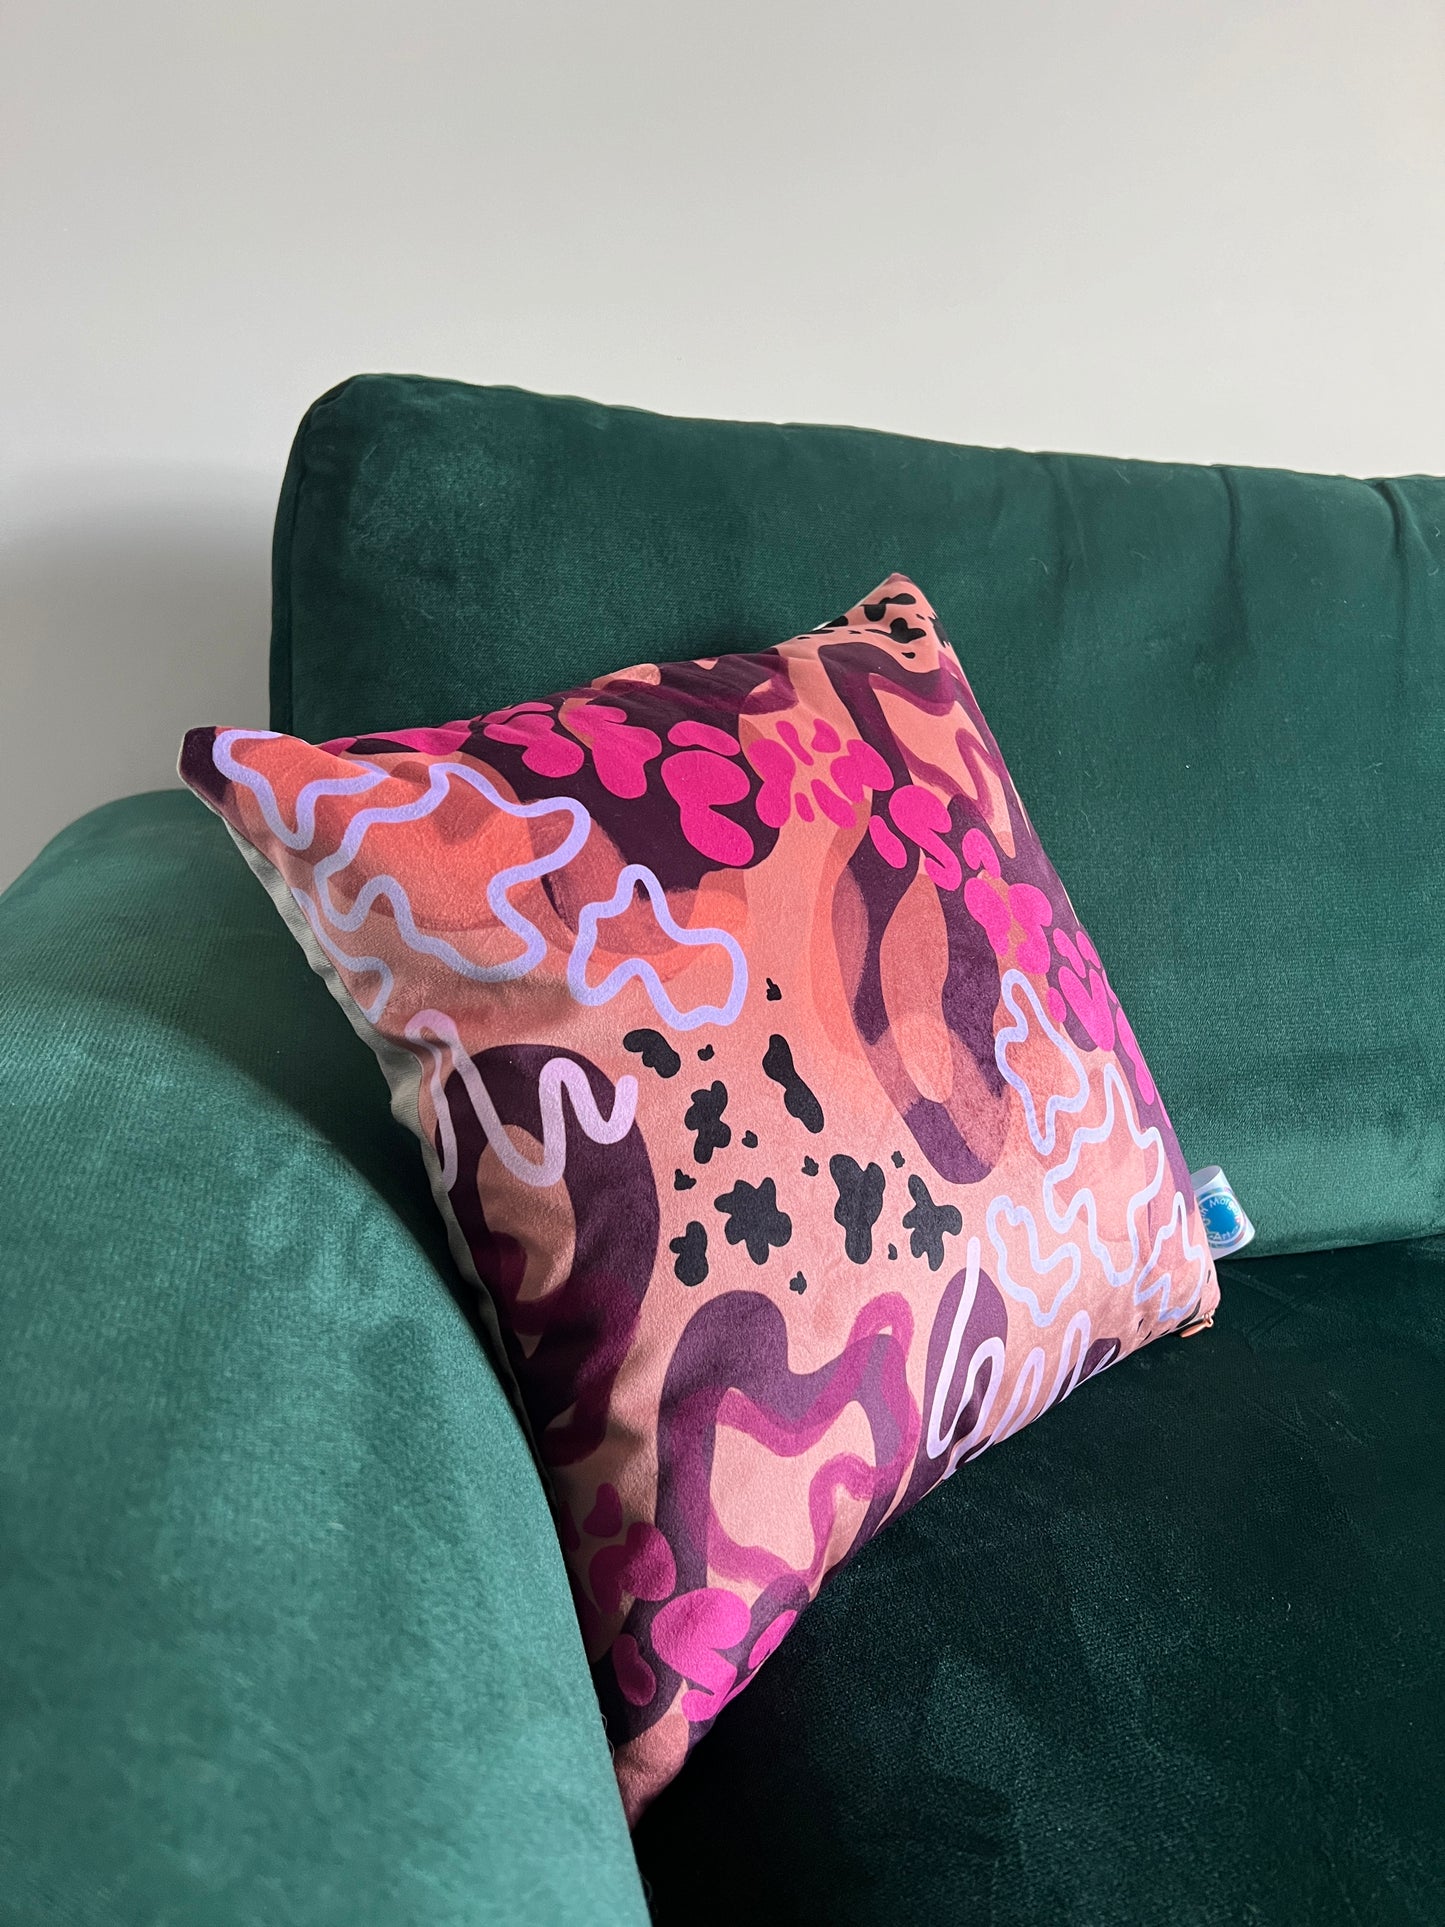 A colourful abstract cushion on a green velvet sofa. The cushion is made up of differing shades of orange, pink and purple in abstract shapes.